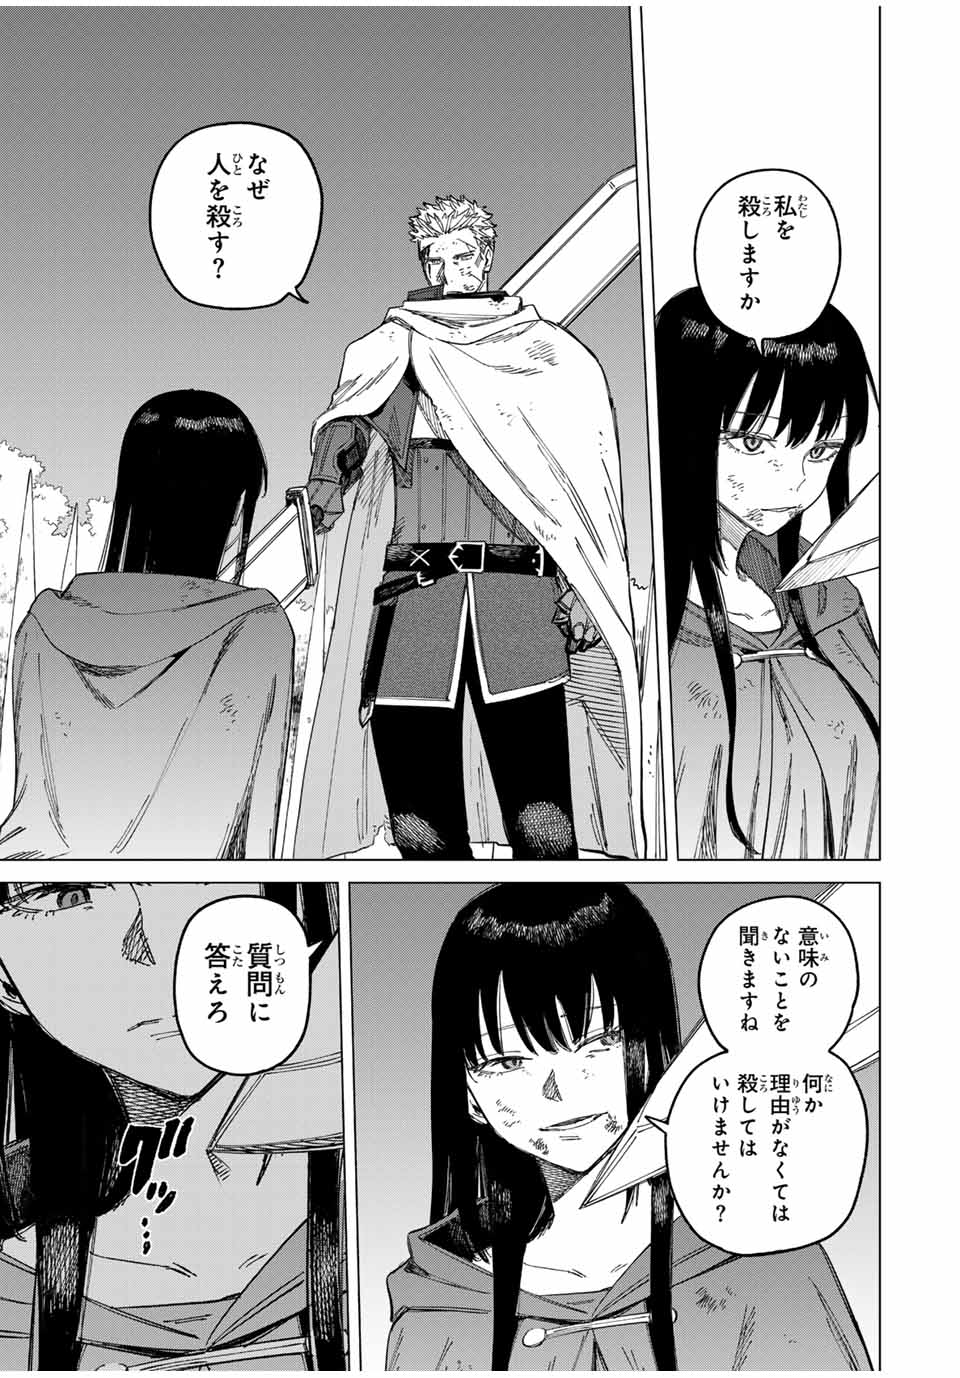 Witch and Mercenary 魔女と傭兵 第1.2話 - Page 21